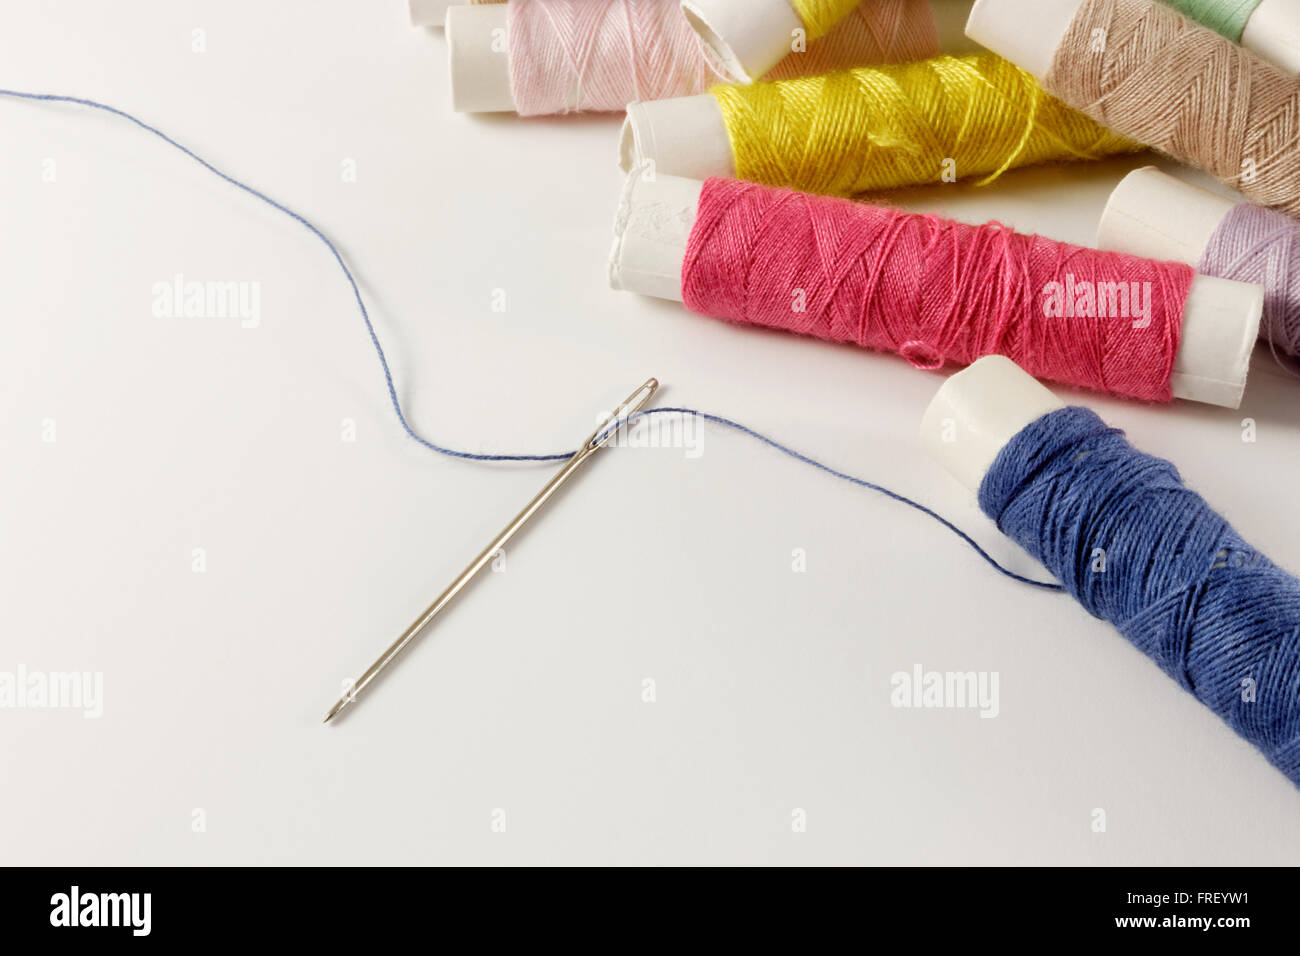 Sewing needle with yarn and threader Stock Photo - Alamy